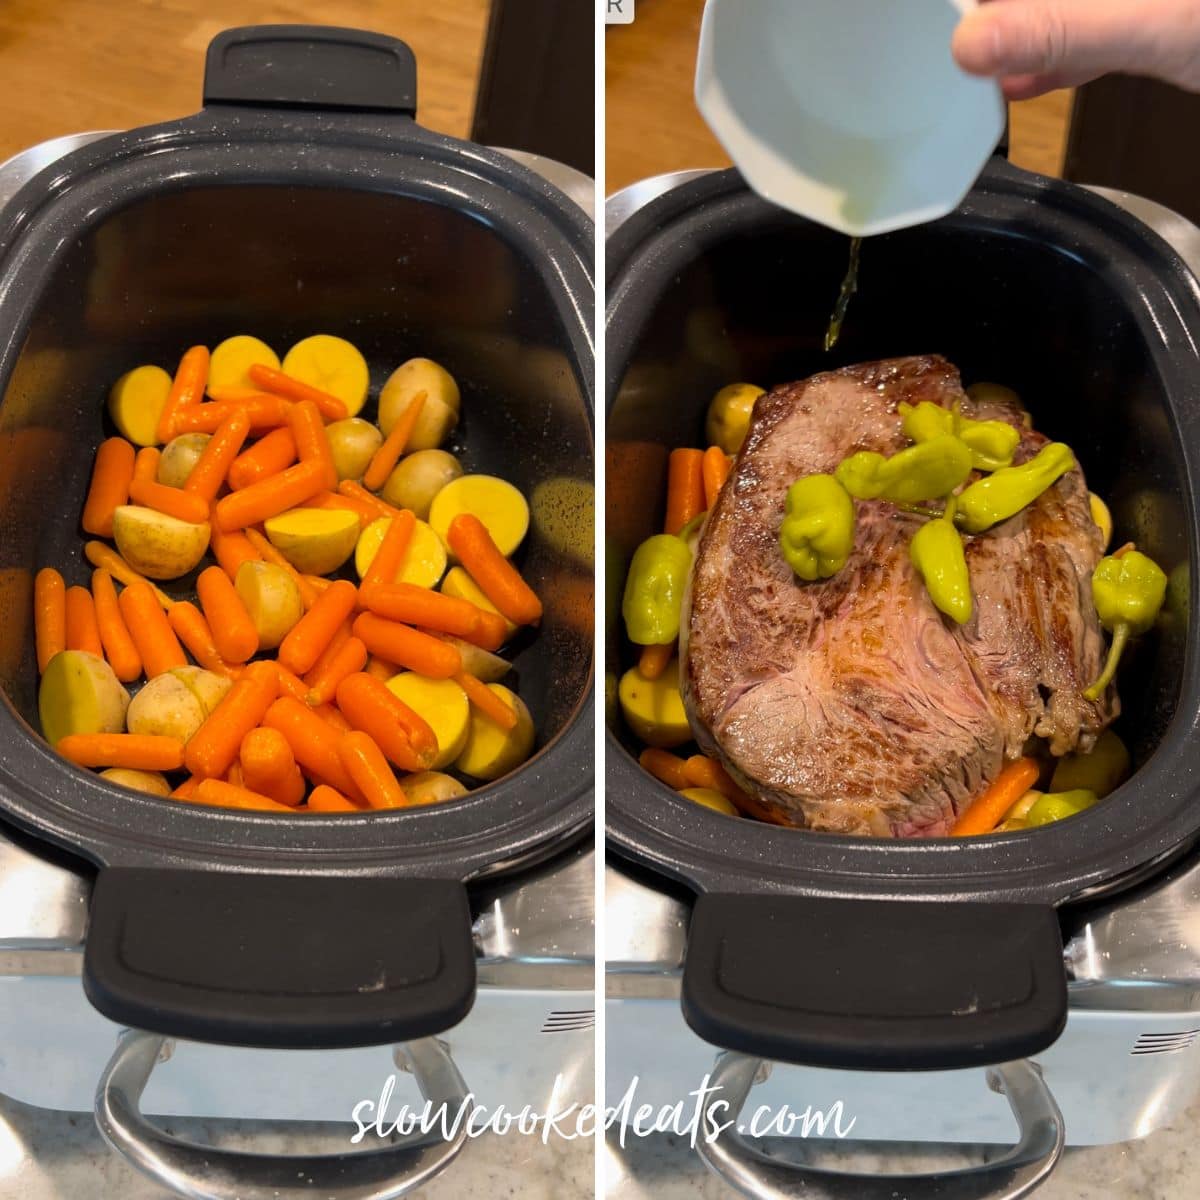 Adding the potatoes and carrots then the roast and pepperoncini to the slow cooker.